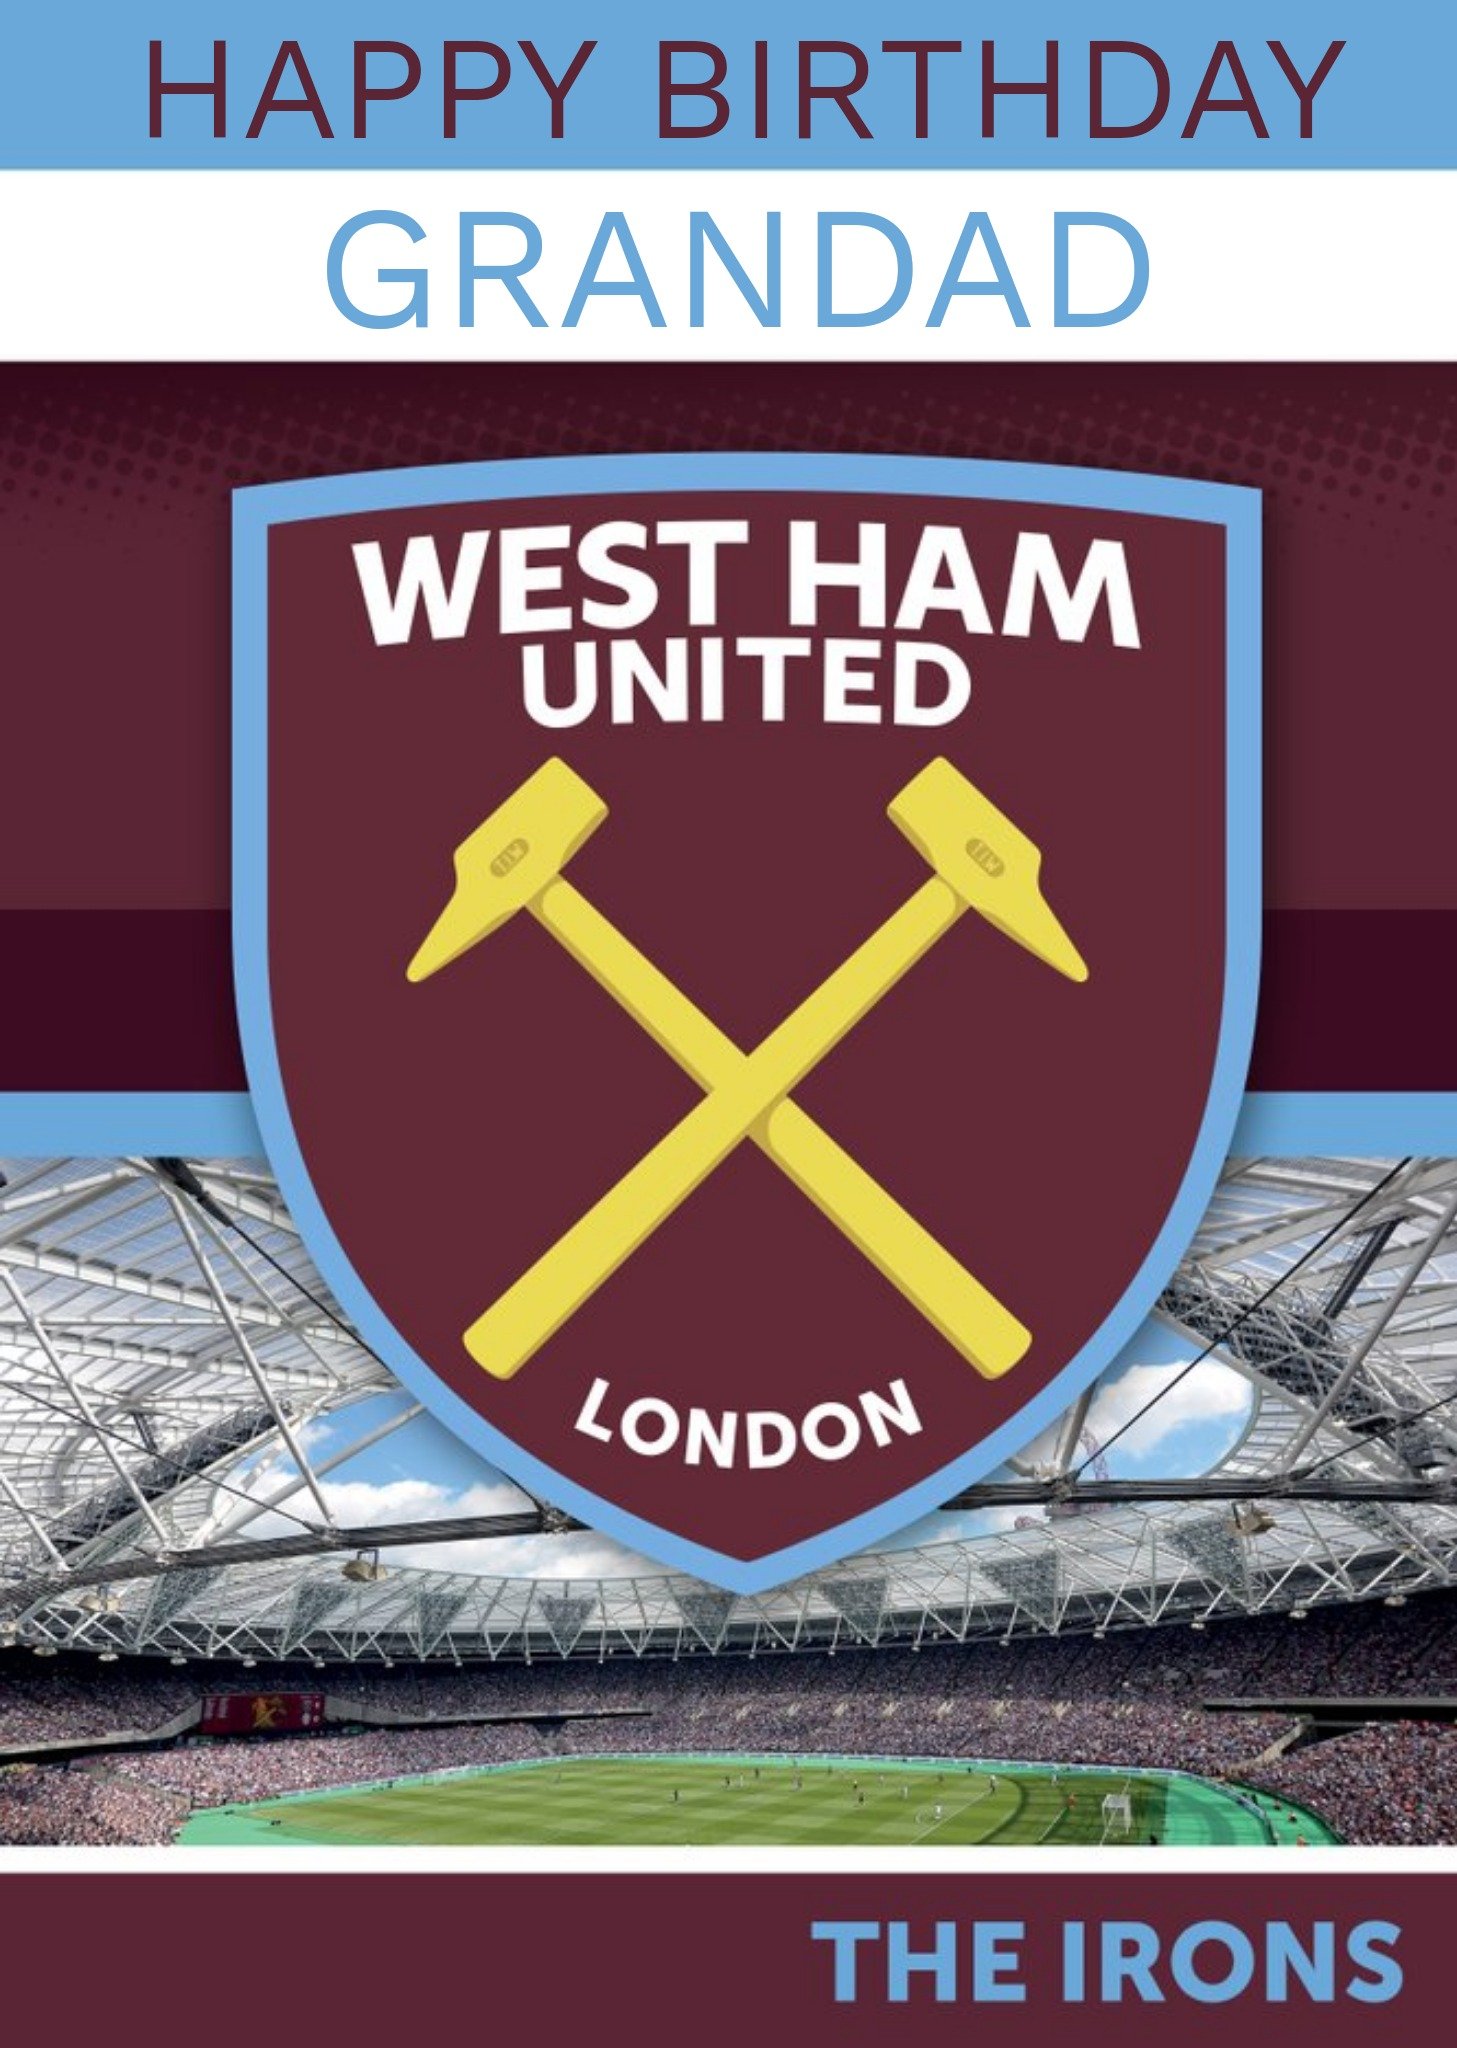 Other West Ham United - Birthday Card - Grandad - The Irons, Large